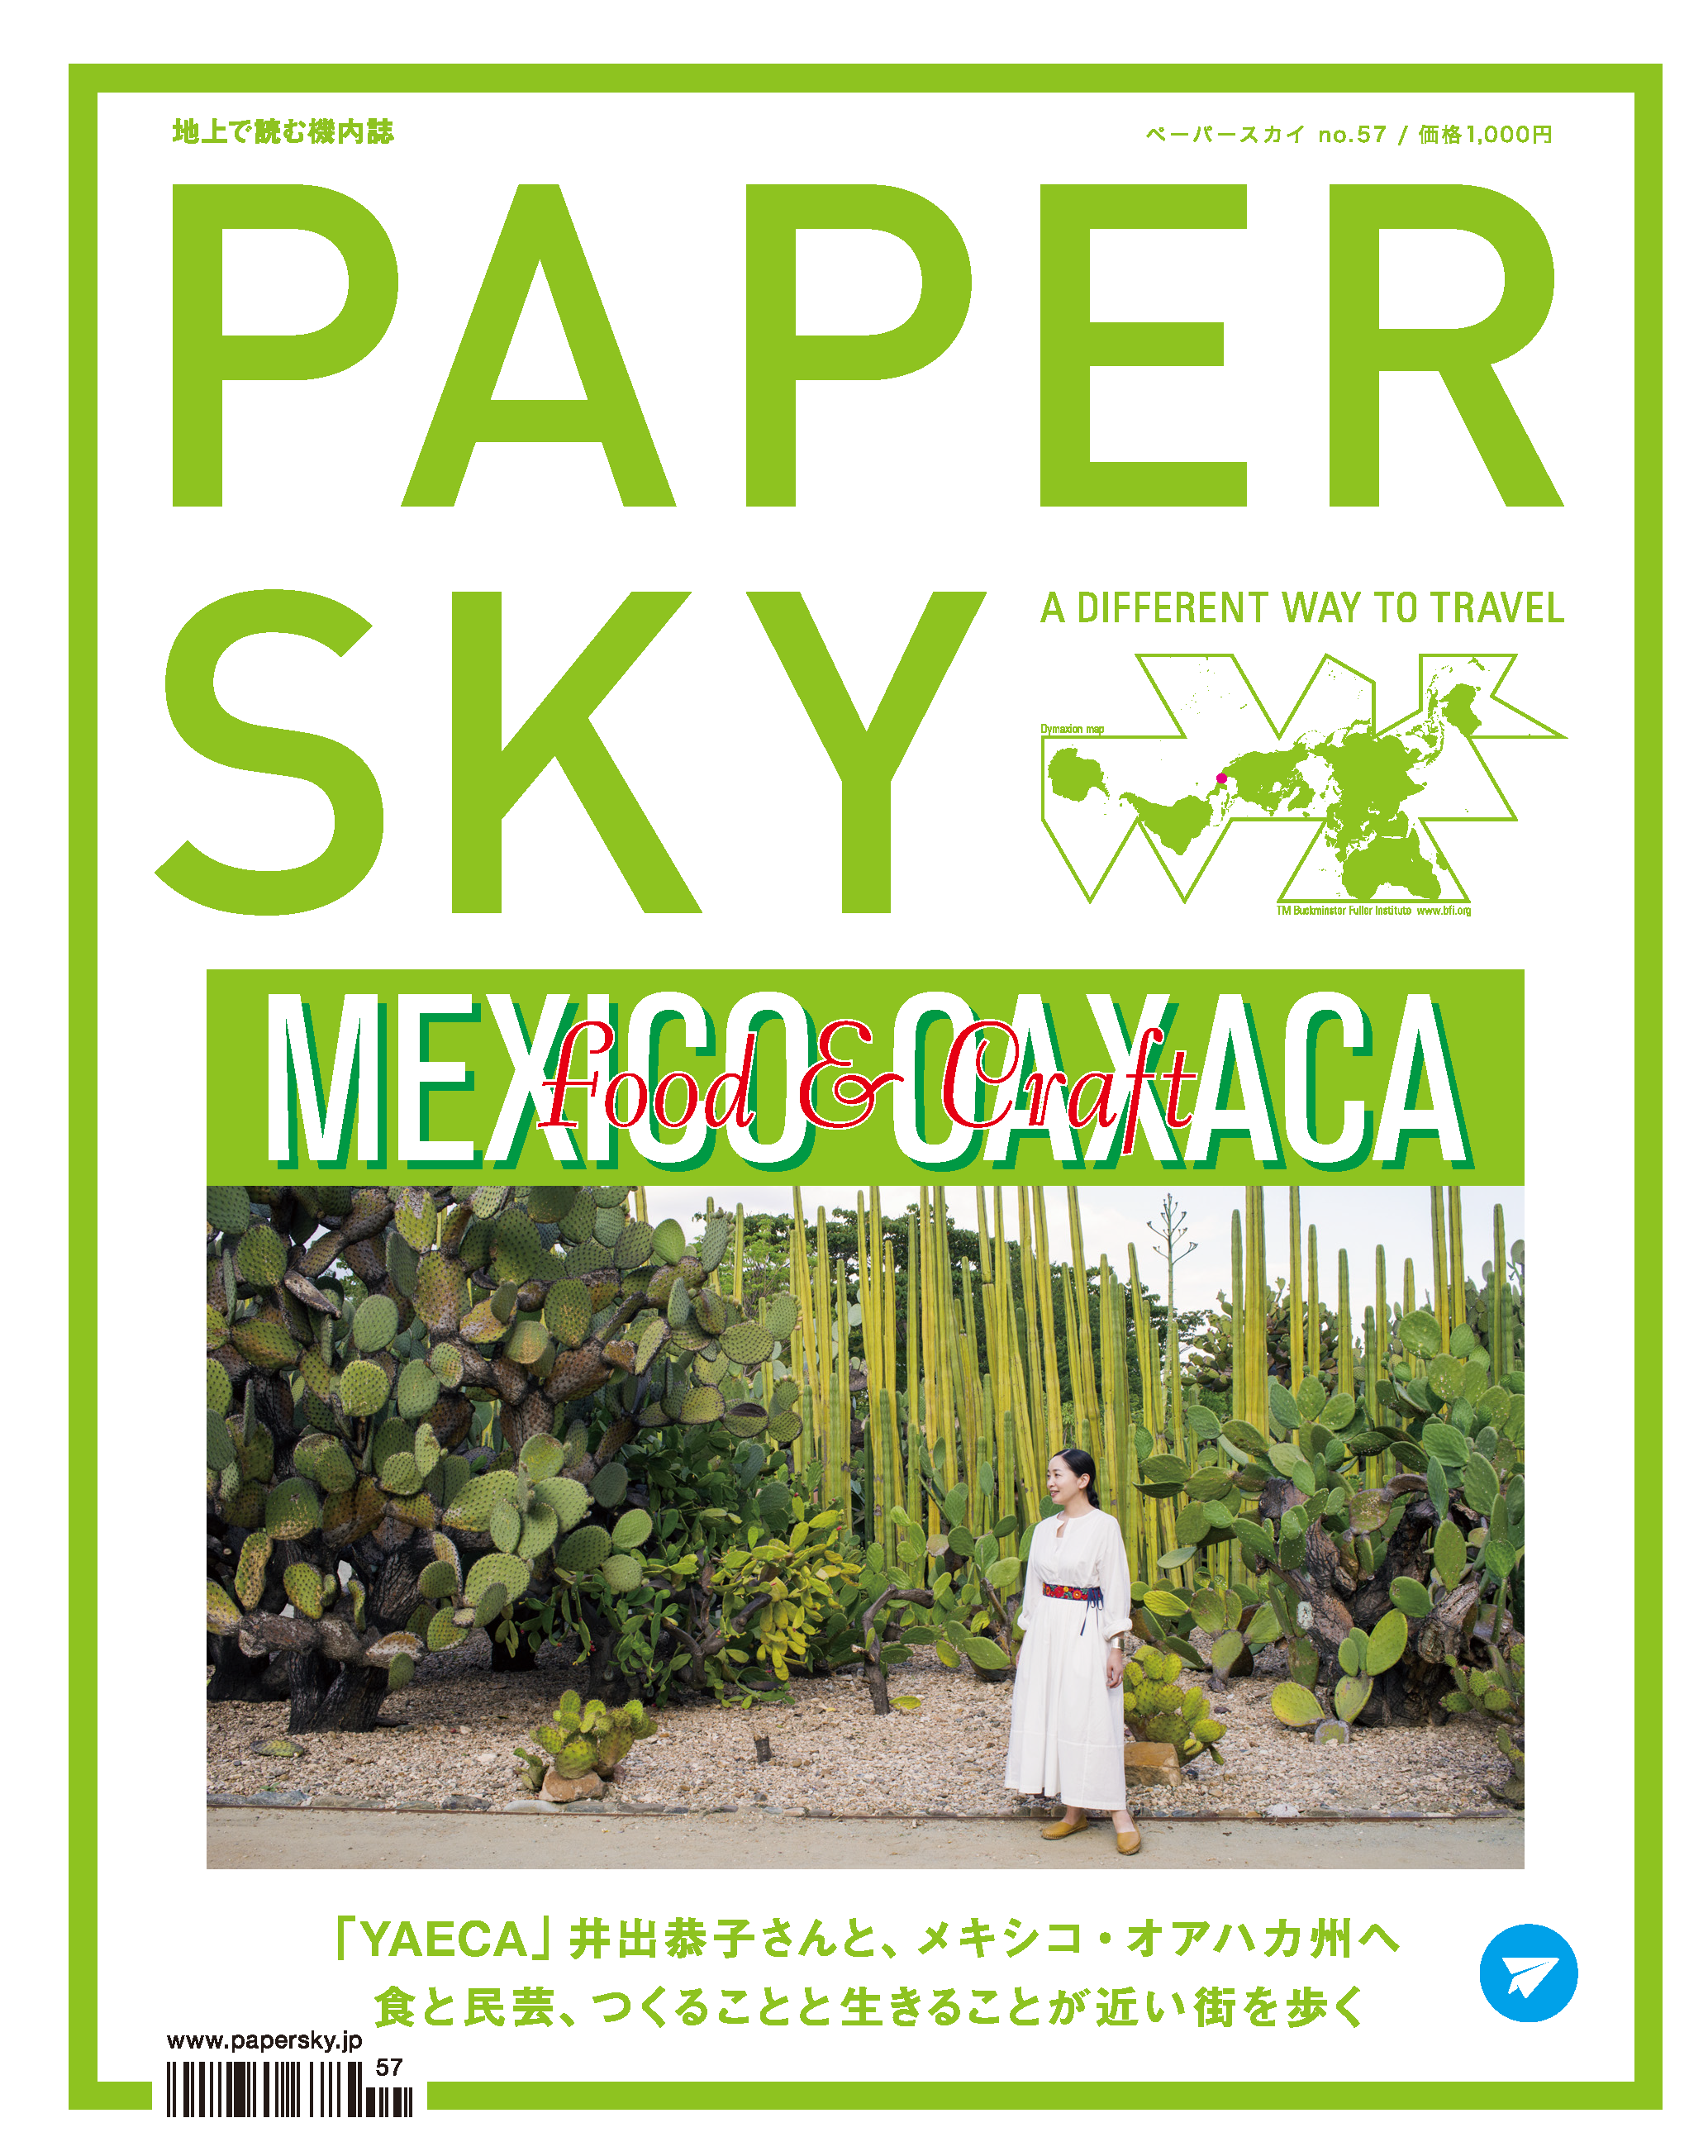 Mexico, Papersky magazine